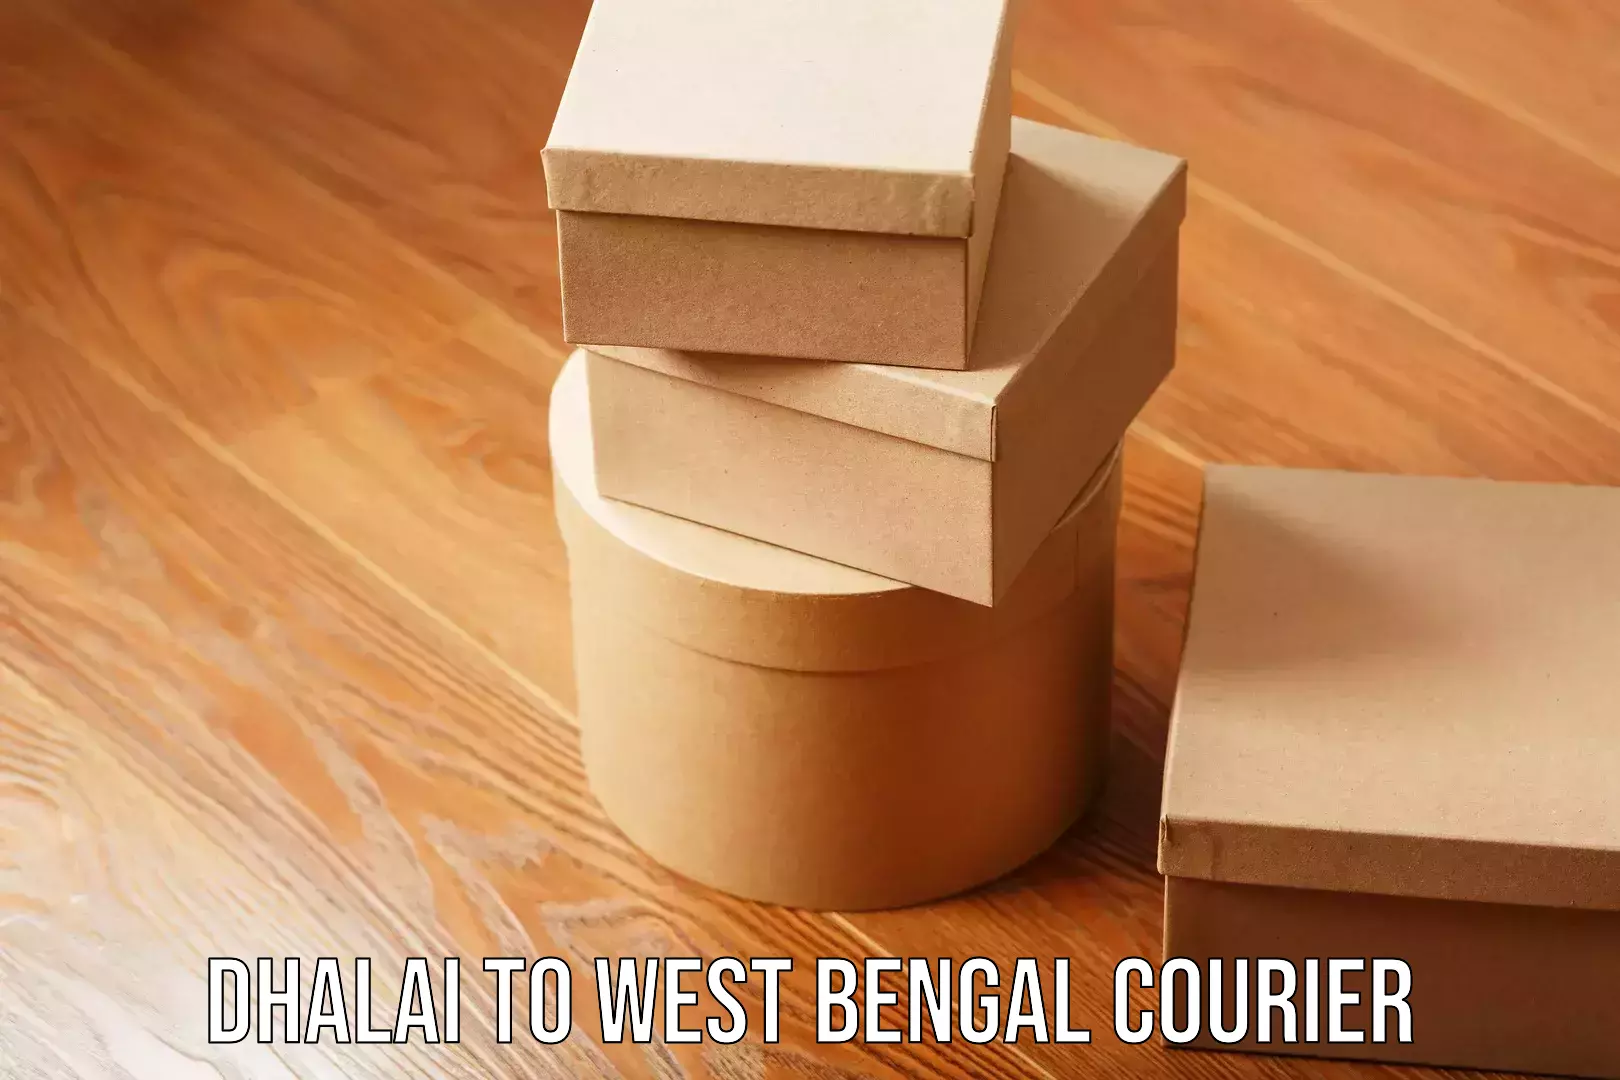 Next day courier Dhalai to West Bengal